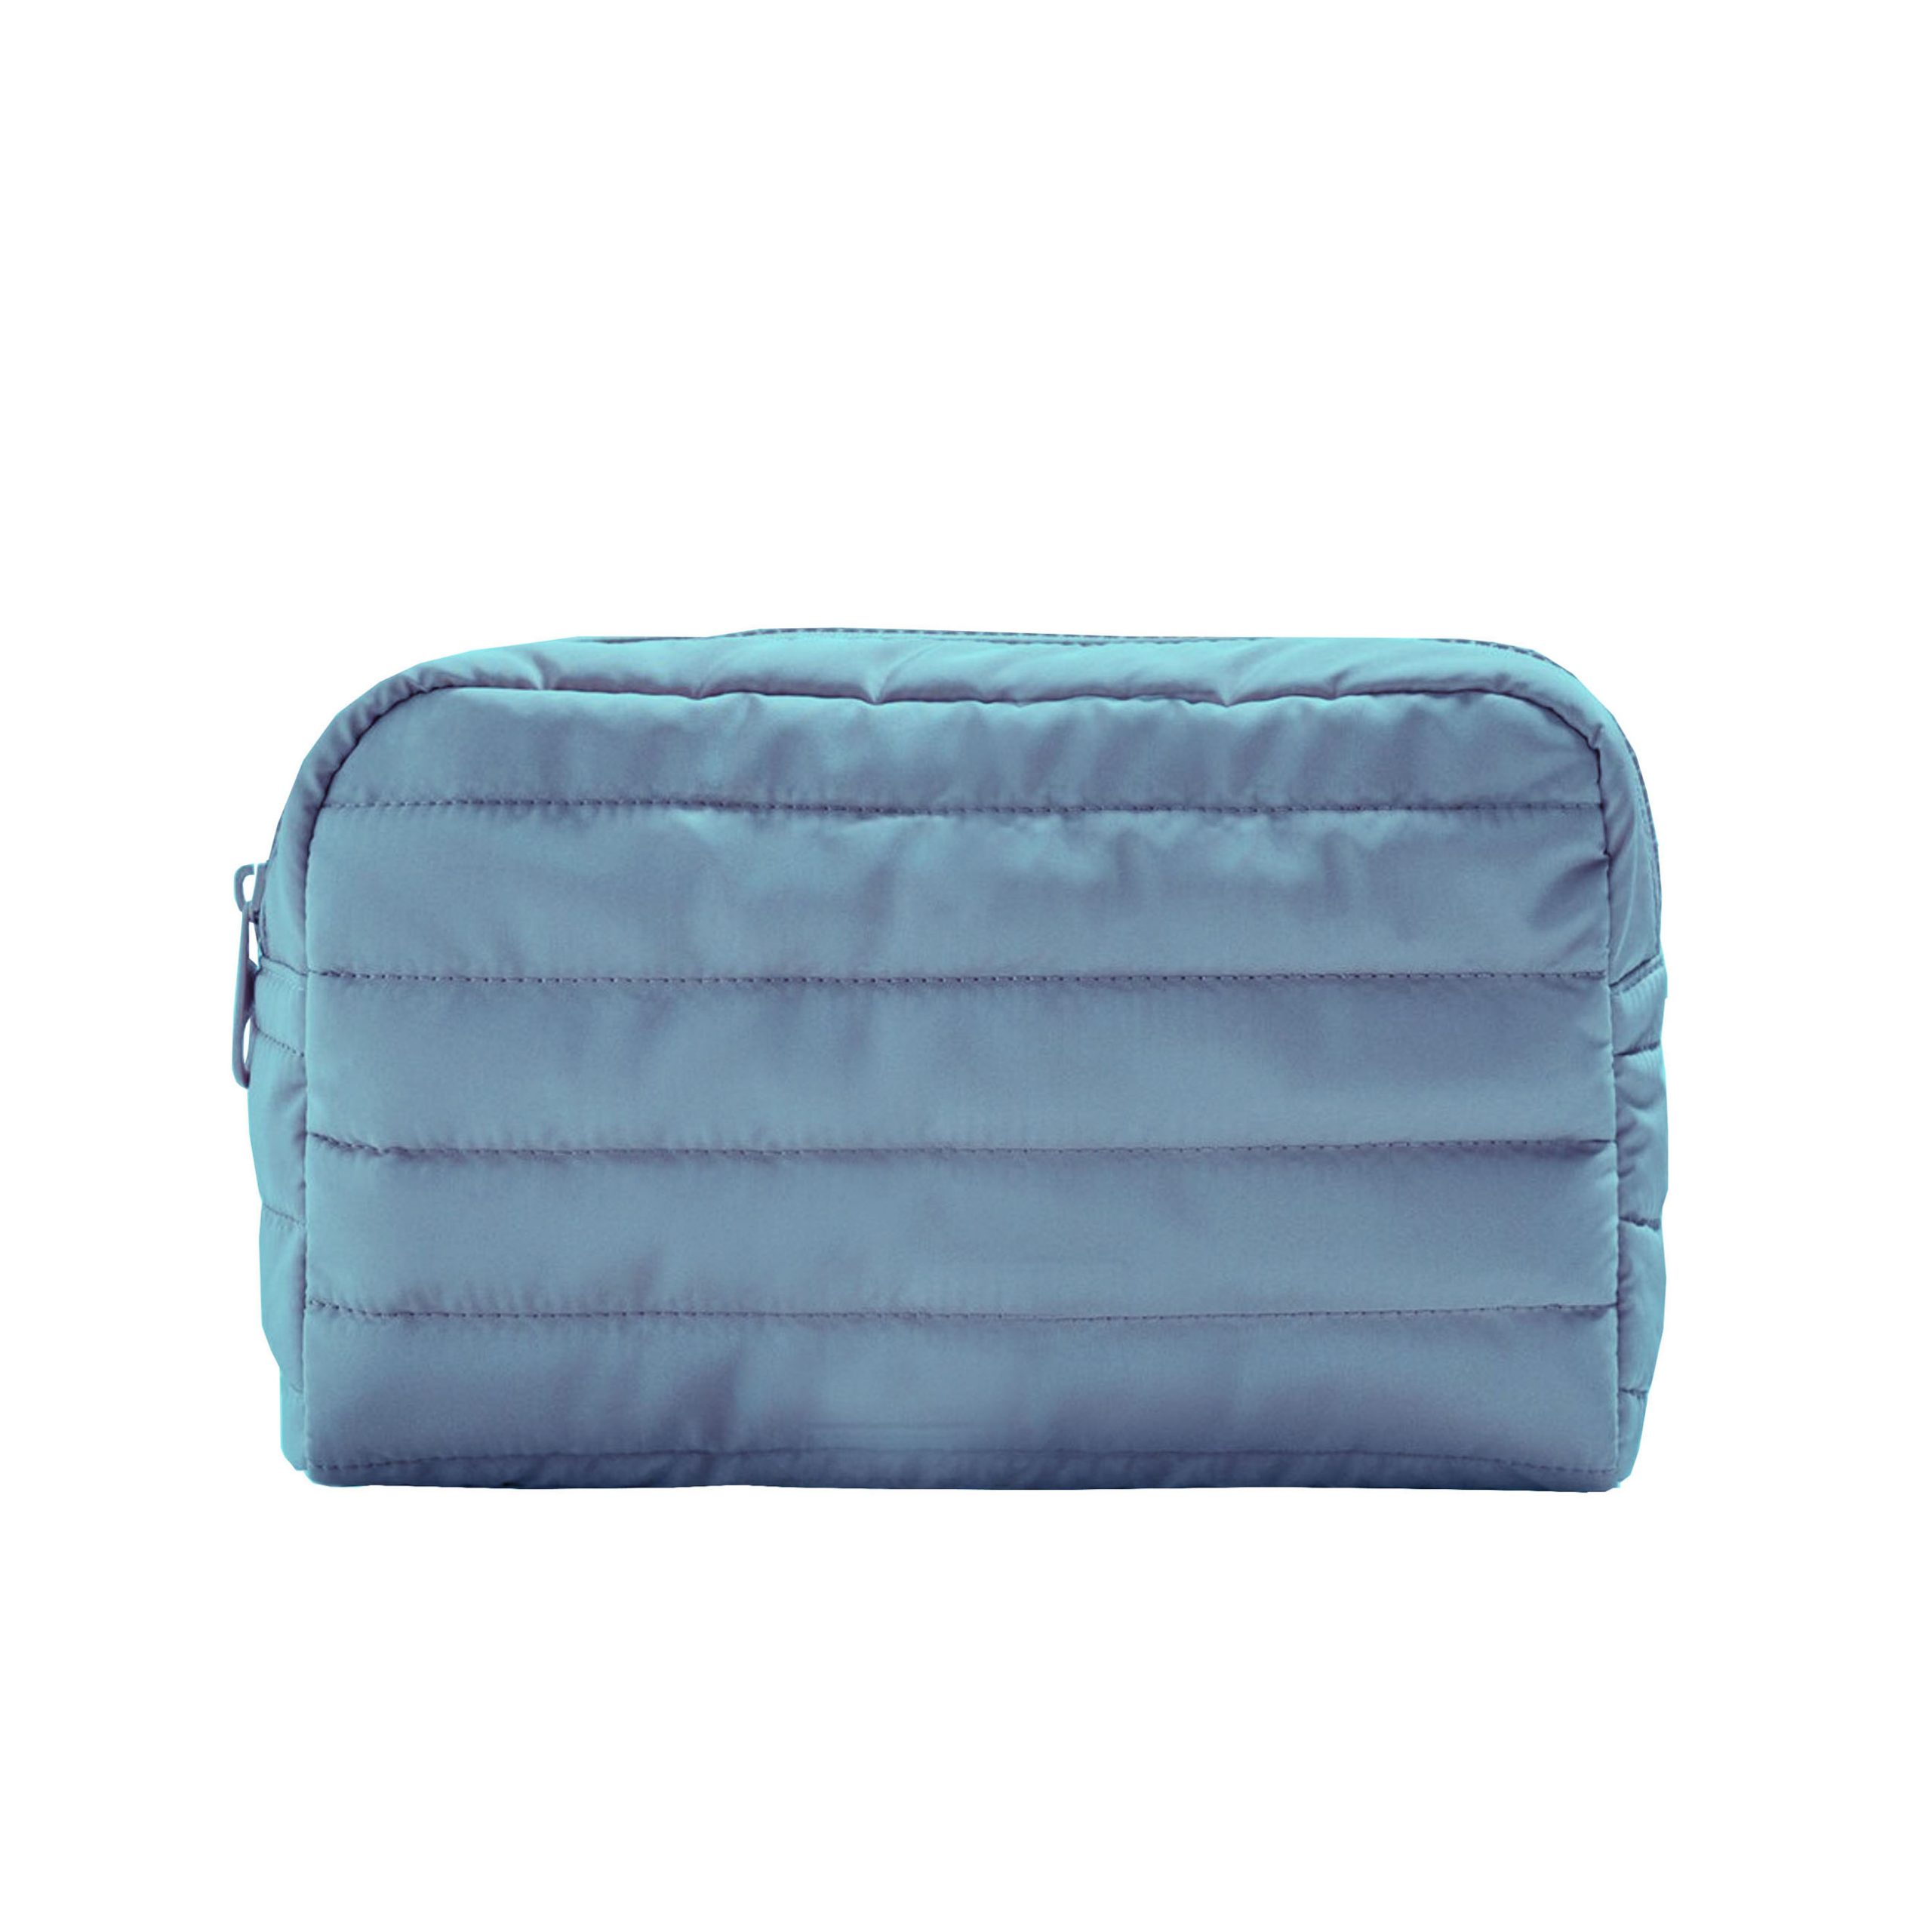 Stylish Quilted Cotton Cosmetic Bag